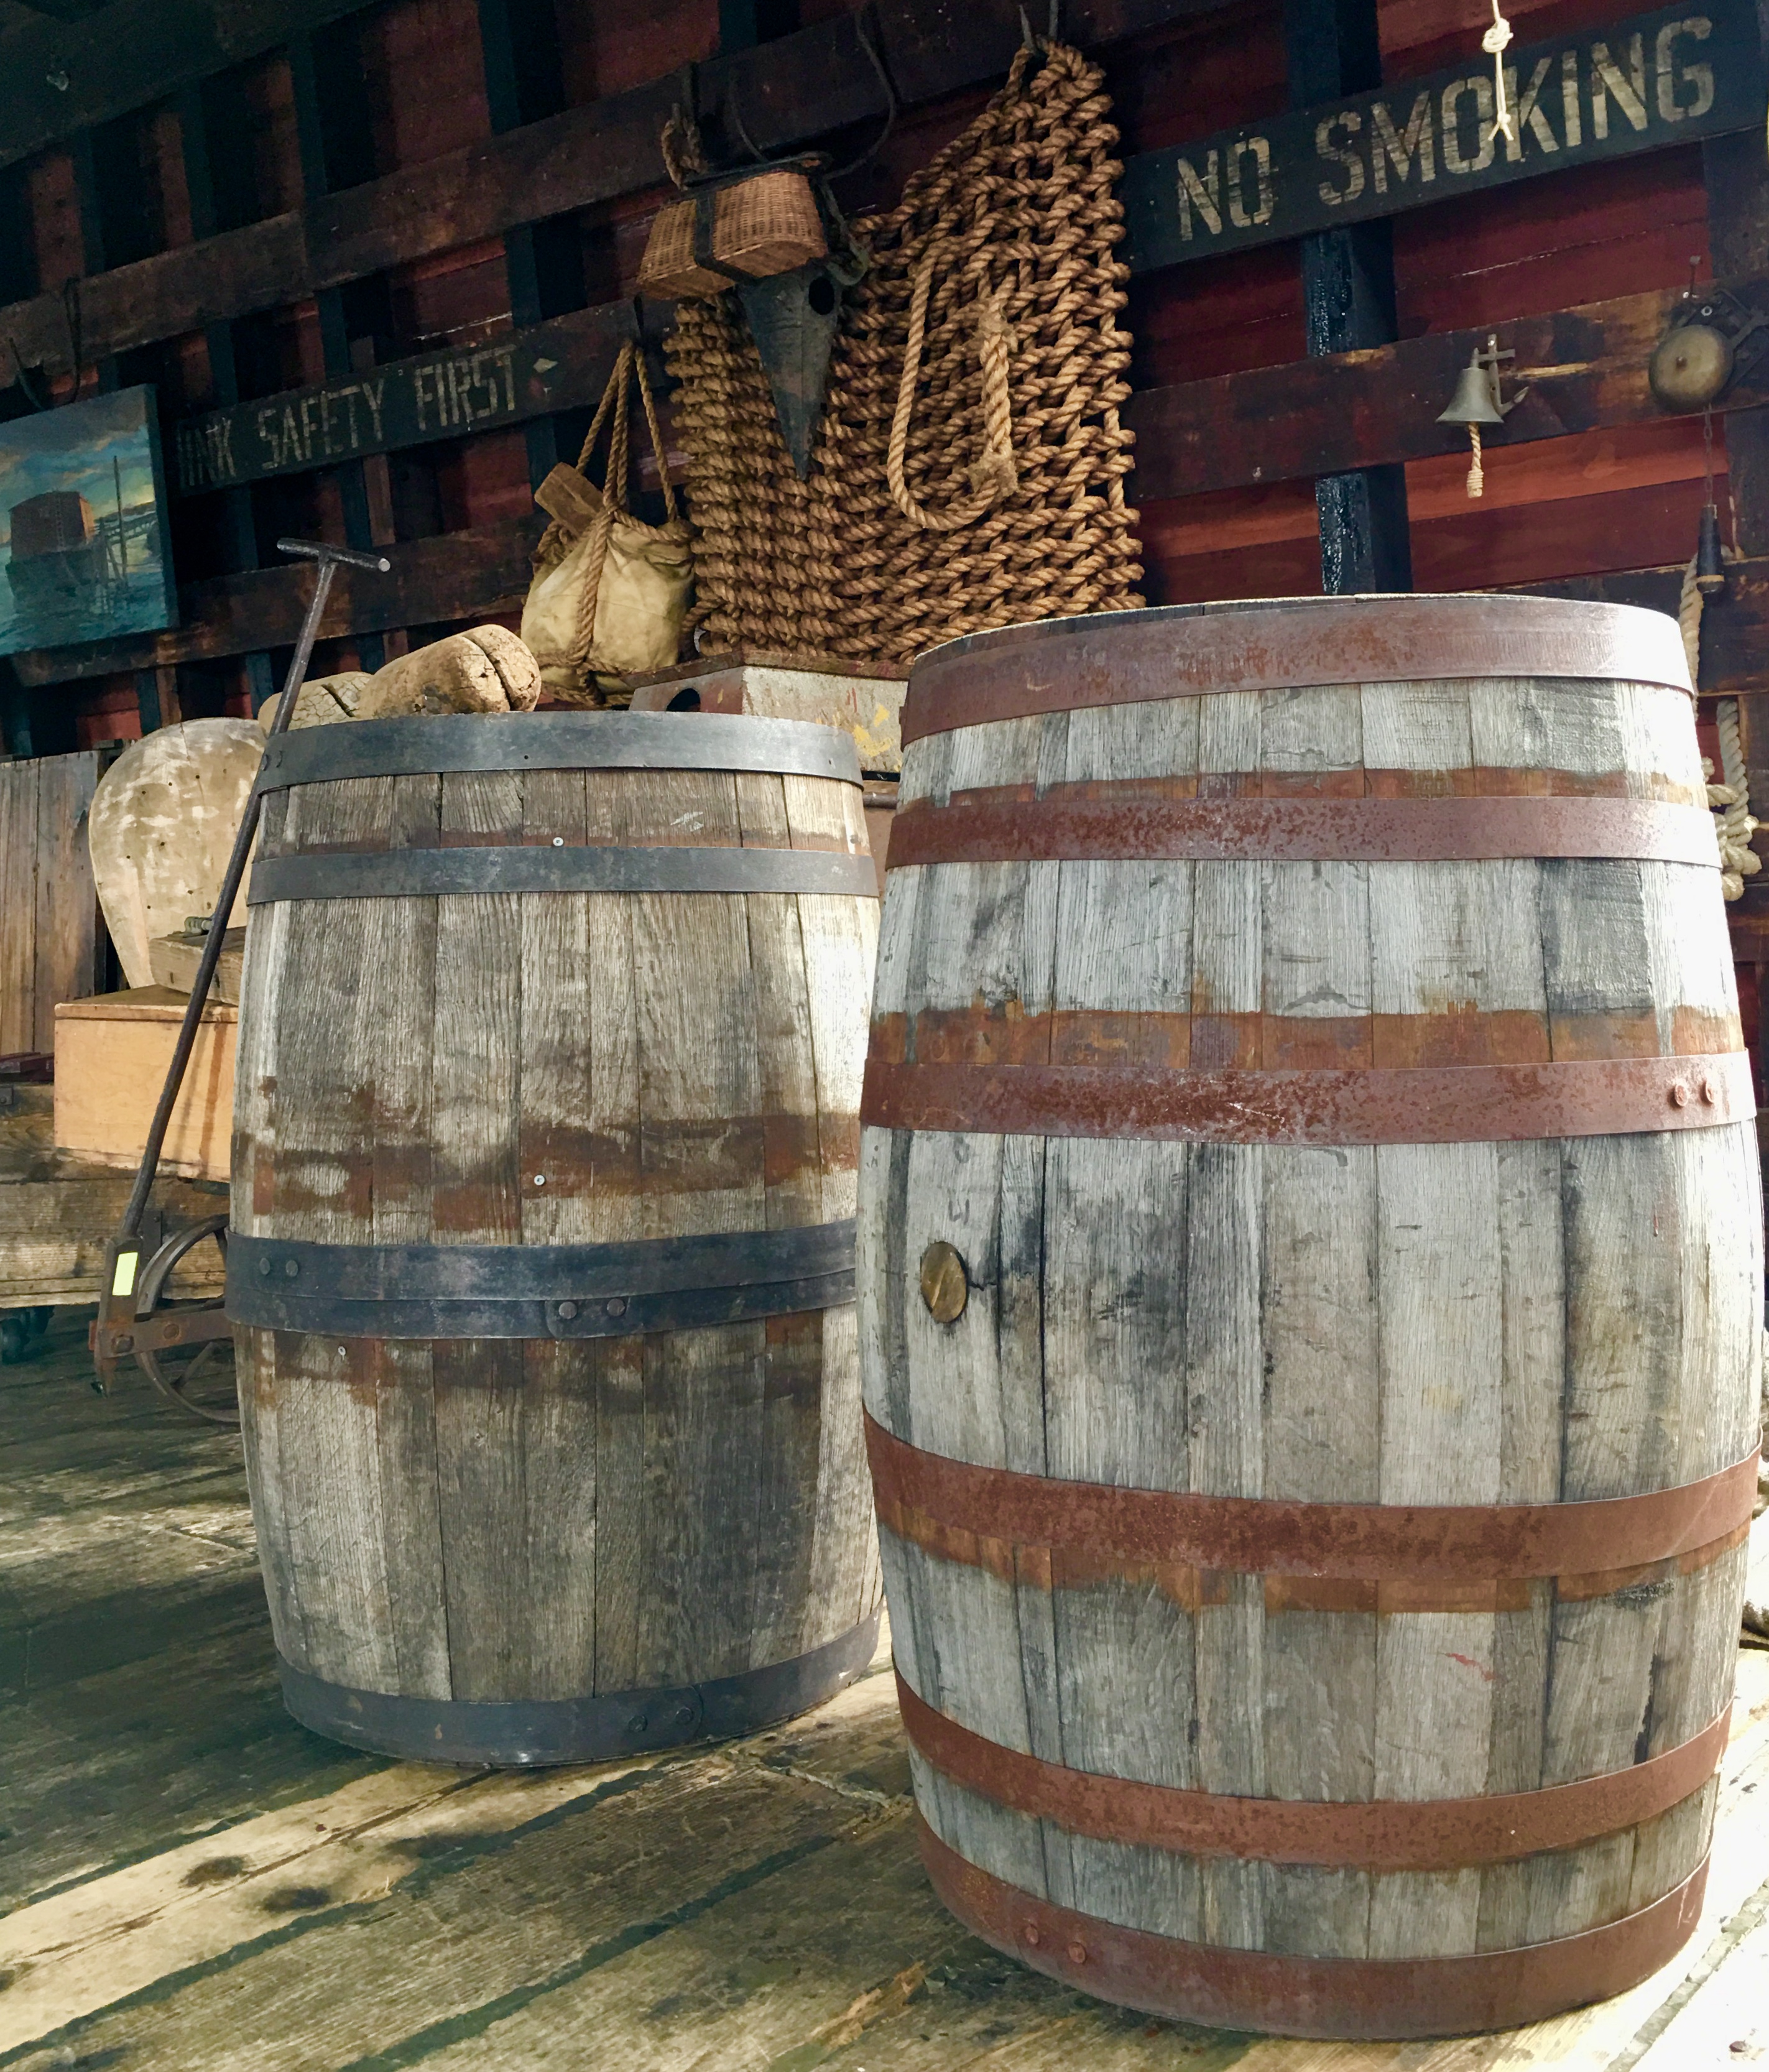 Visiting the Waterfront Museum is a barrel of fun. Eagle photo by Lore Croghan